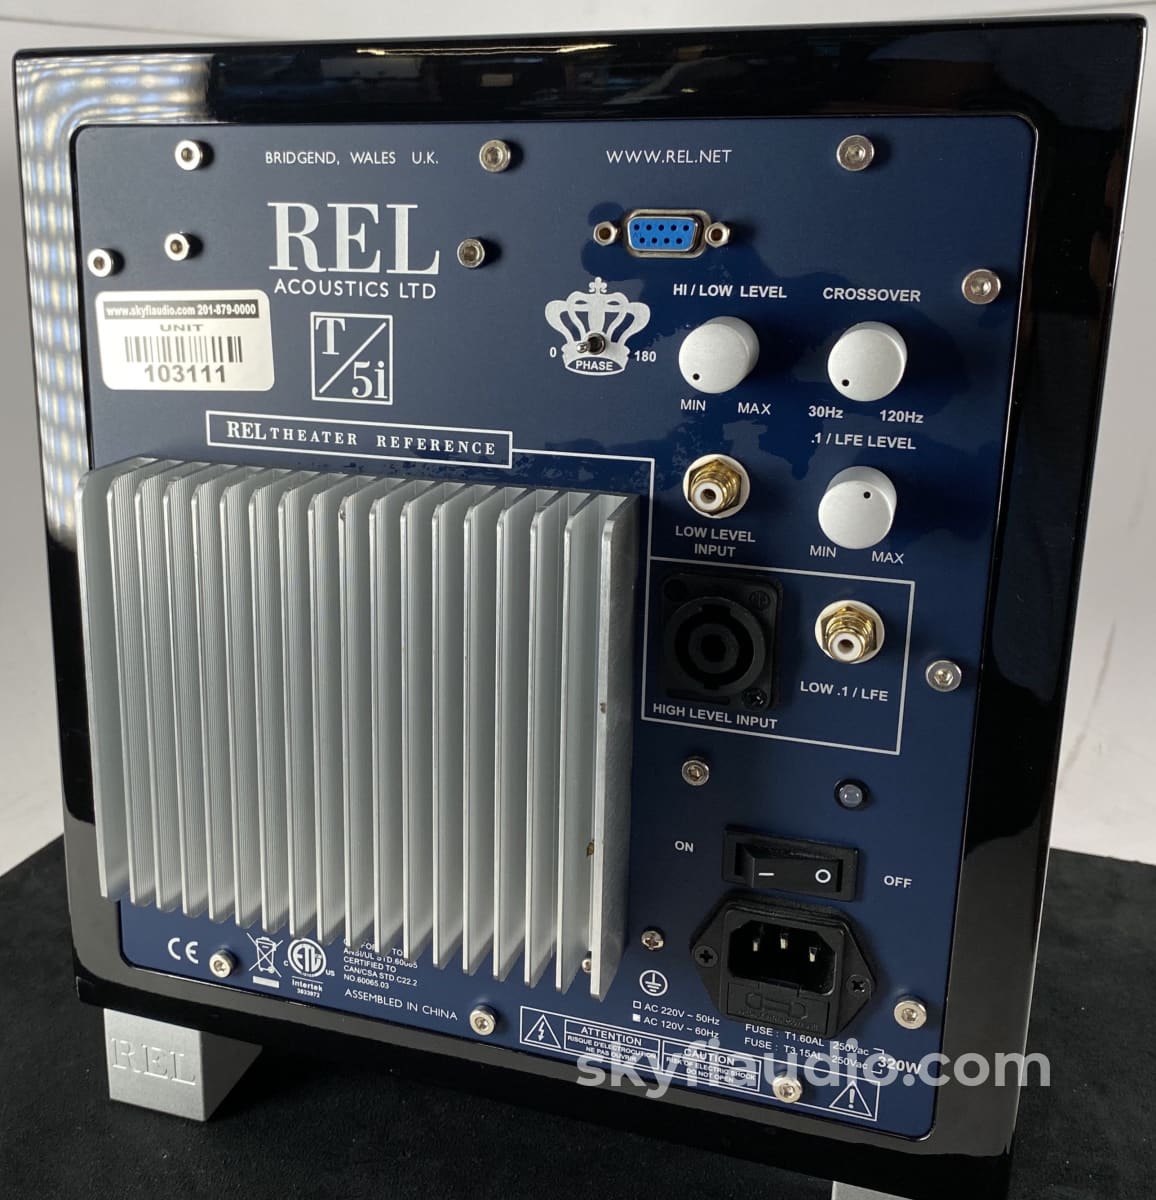 Rel Acoustics T/5I - Compact And Powered Down-Firing 8 Subwoofer Speakers